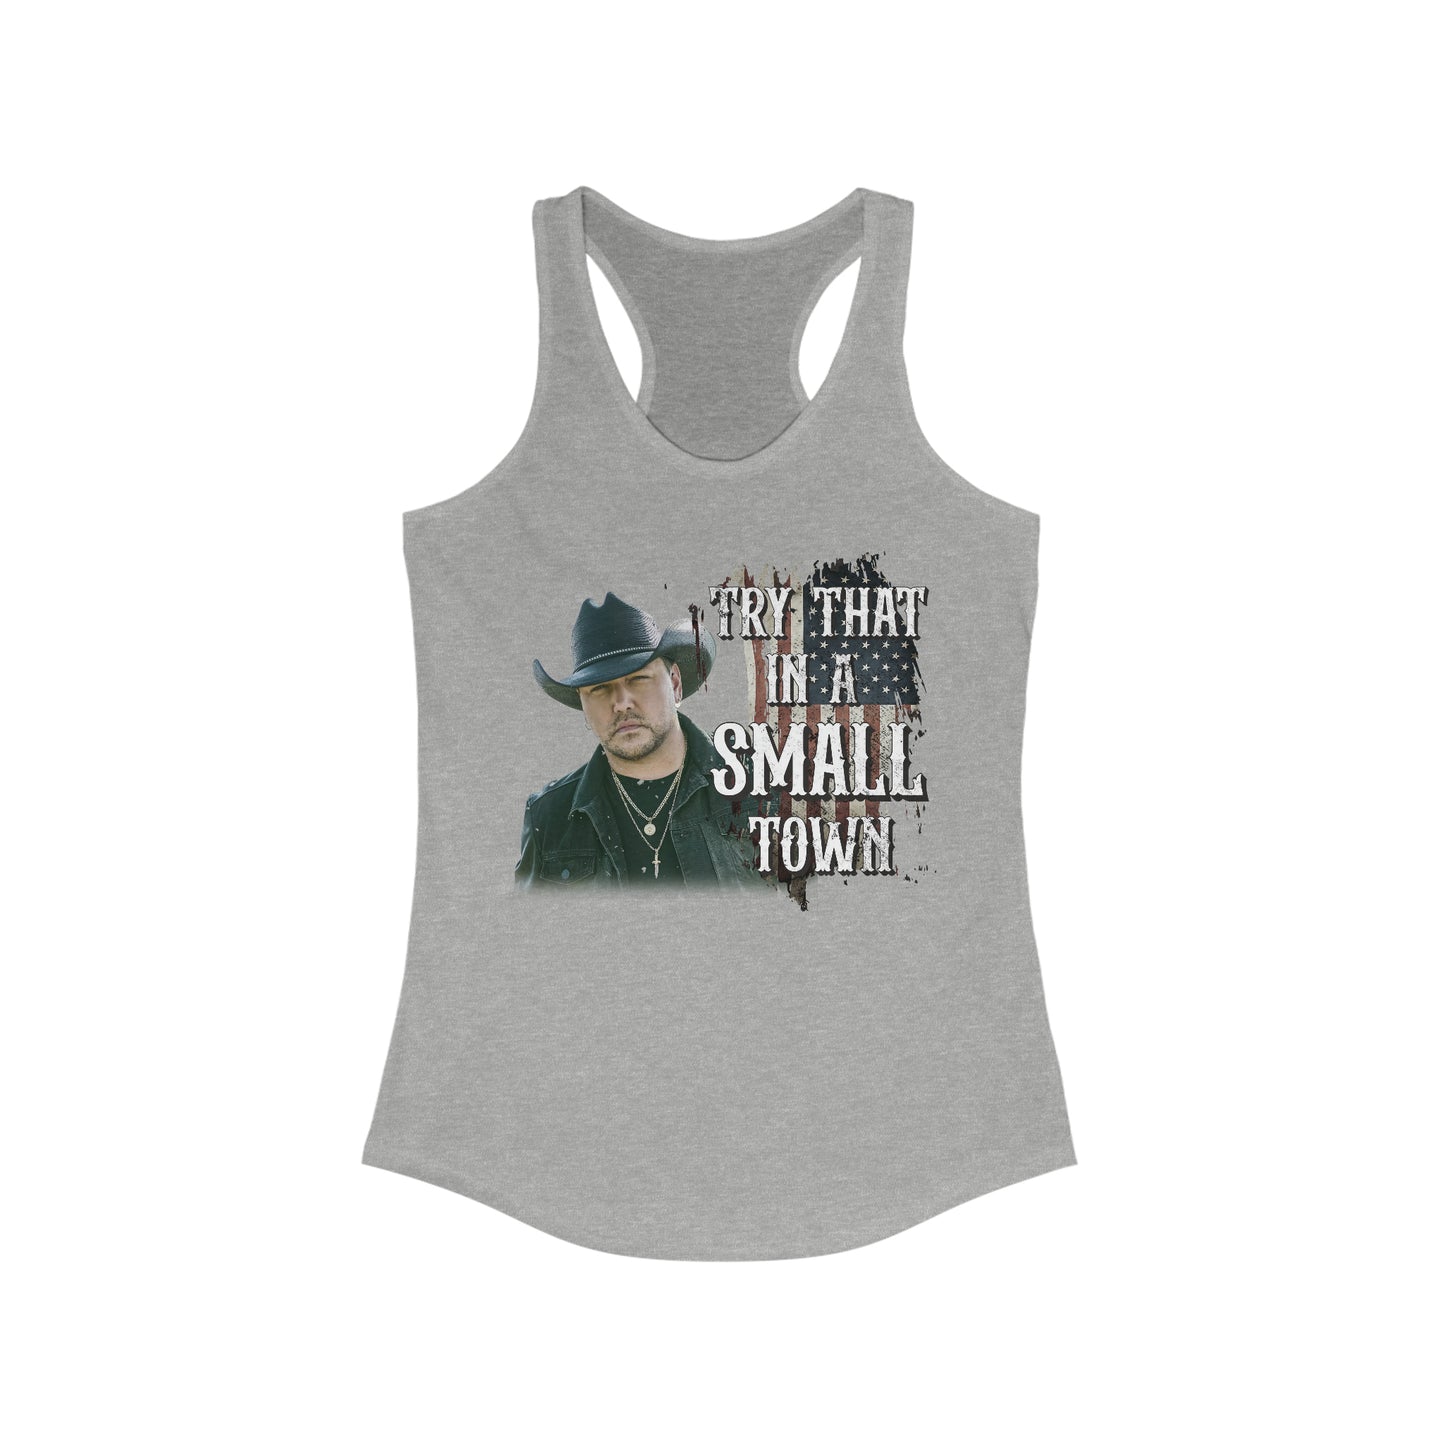 Try that in a small town Jason Aldean Women's Ideal Racerback Tank - XS / Heather Grey - S / Heather Grey - M / Heather Grey - L / Heather Grey - XL / Heather Grey - 2XL / Heather Grey